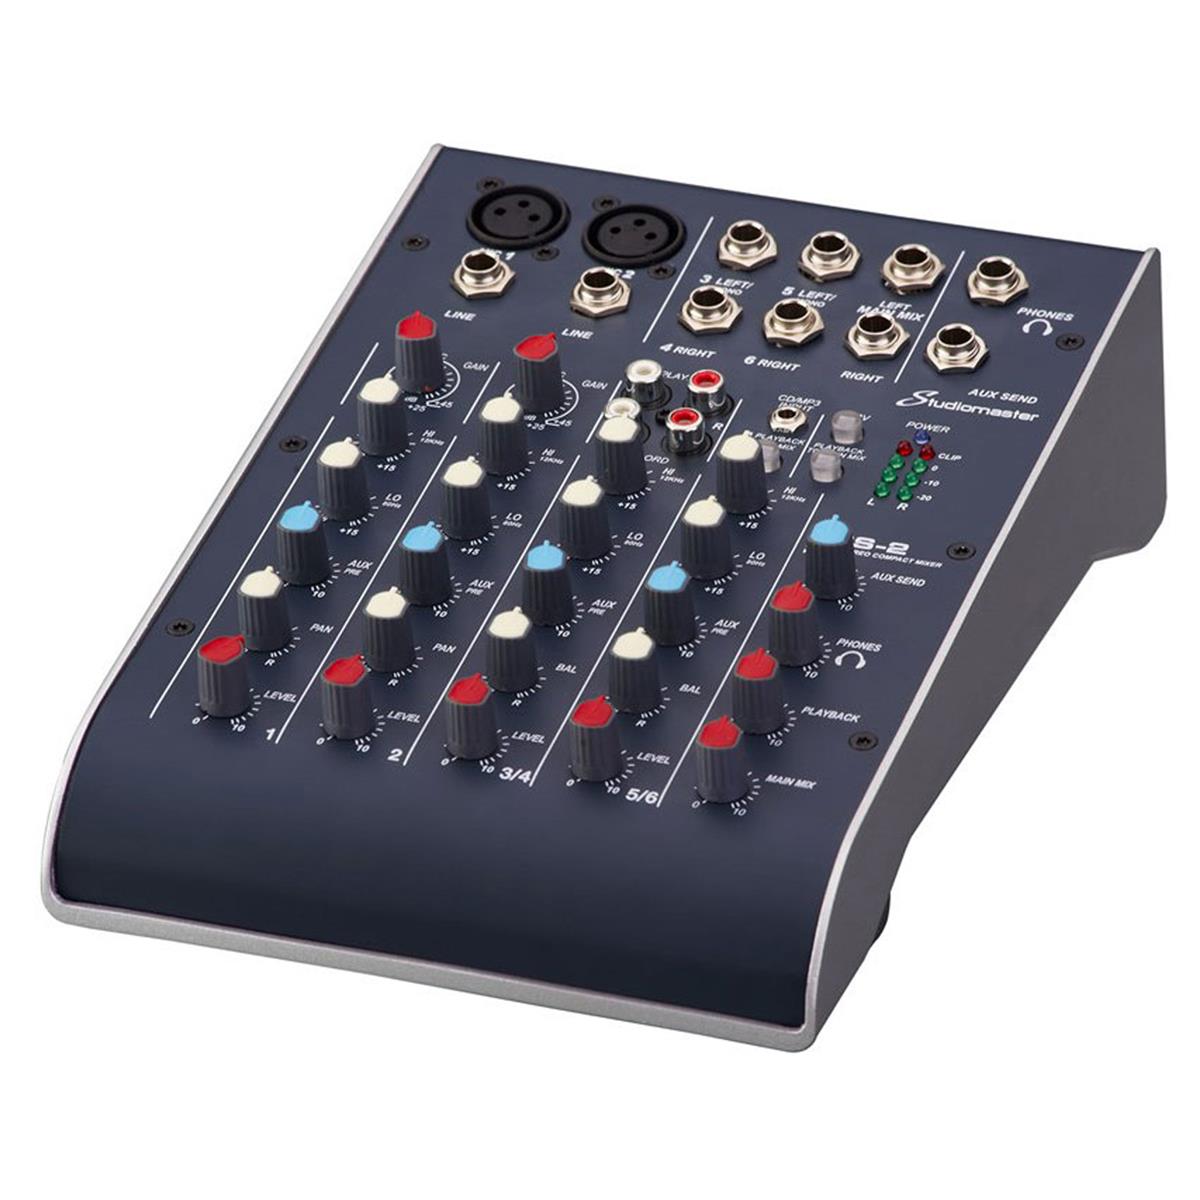 6-Channel Ultra Compact Analog Console Mixer with 2 Band EQ - Studiomaster C2-2